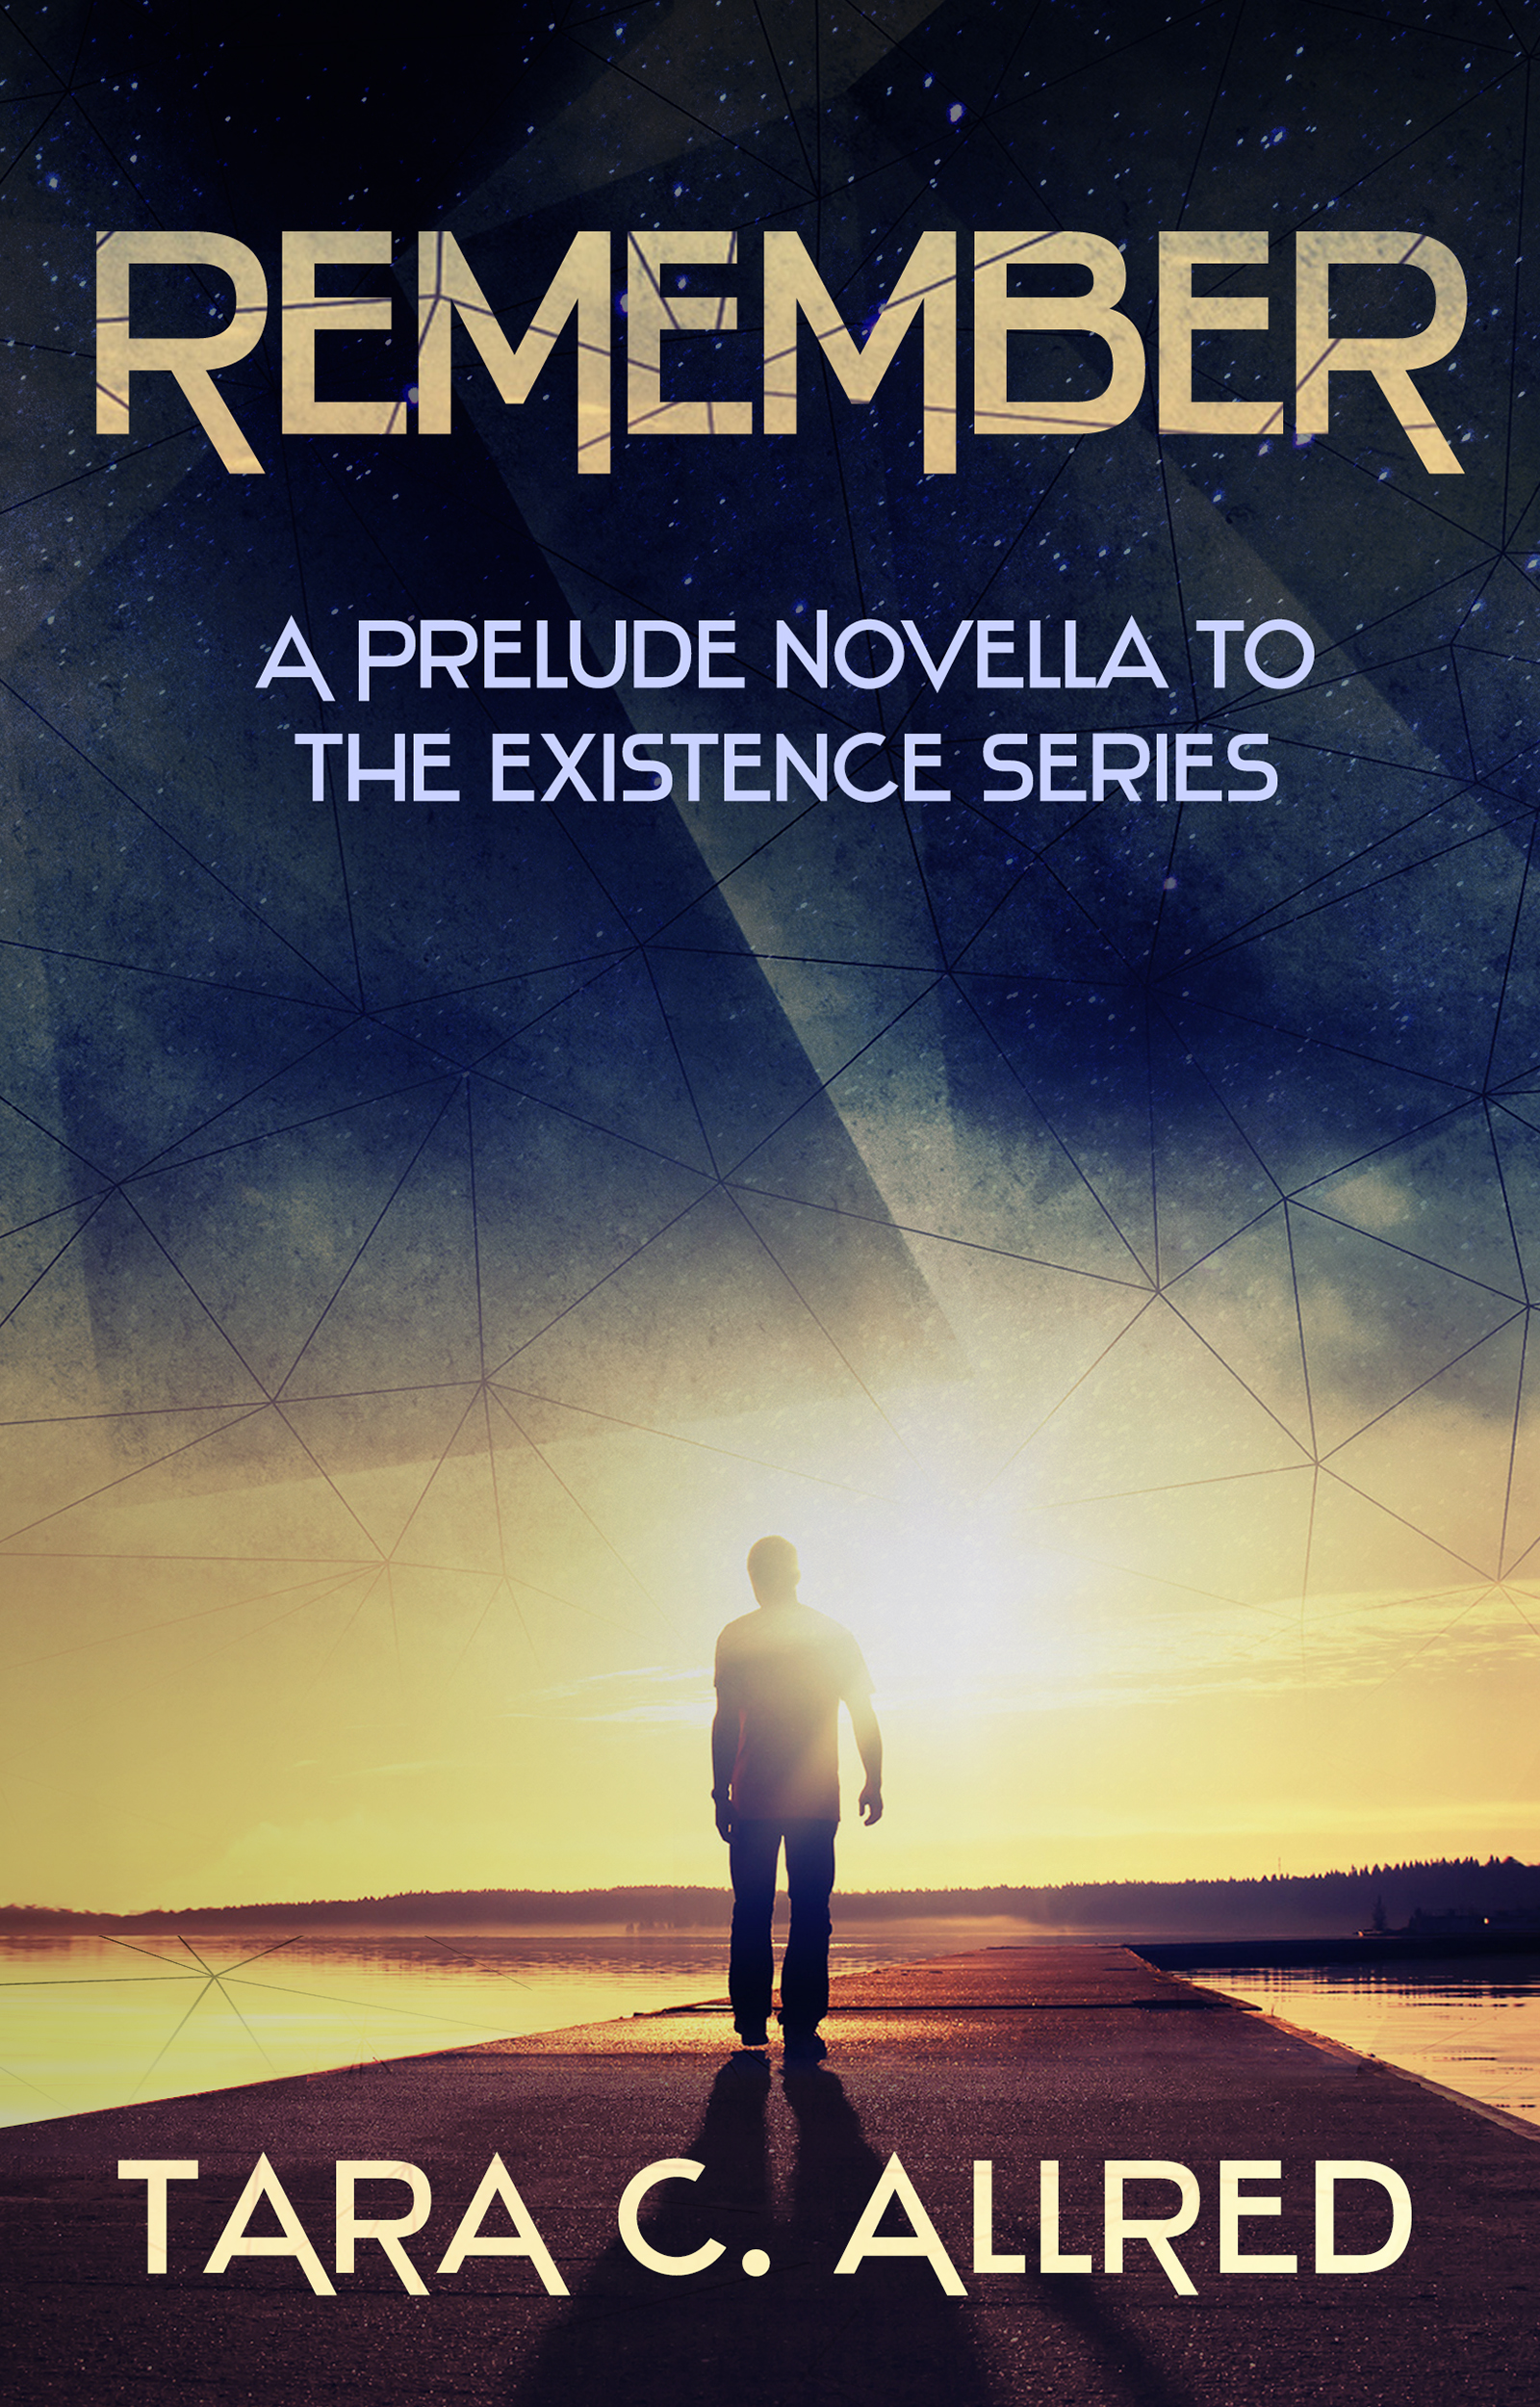 FREE: REMEMBER: A Prelude Novella to The Existence Series by Tara C. Allred